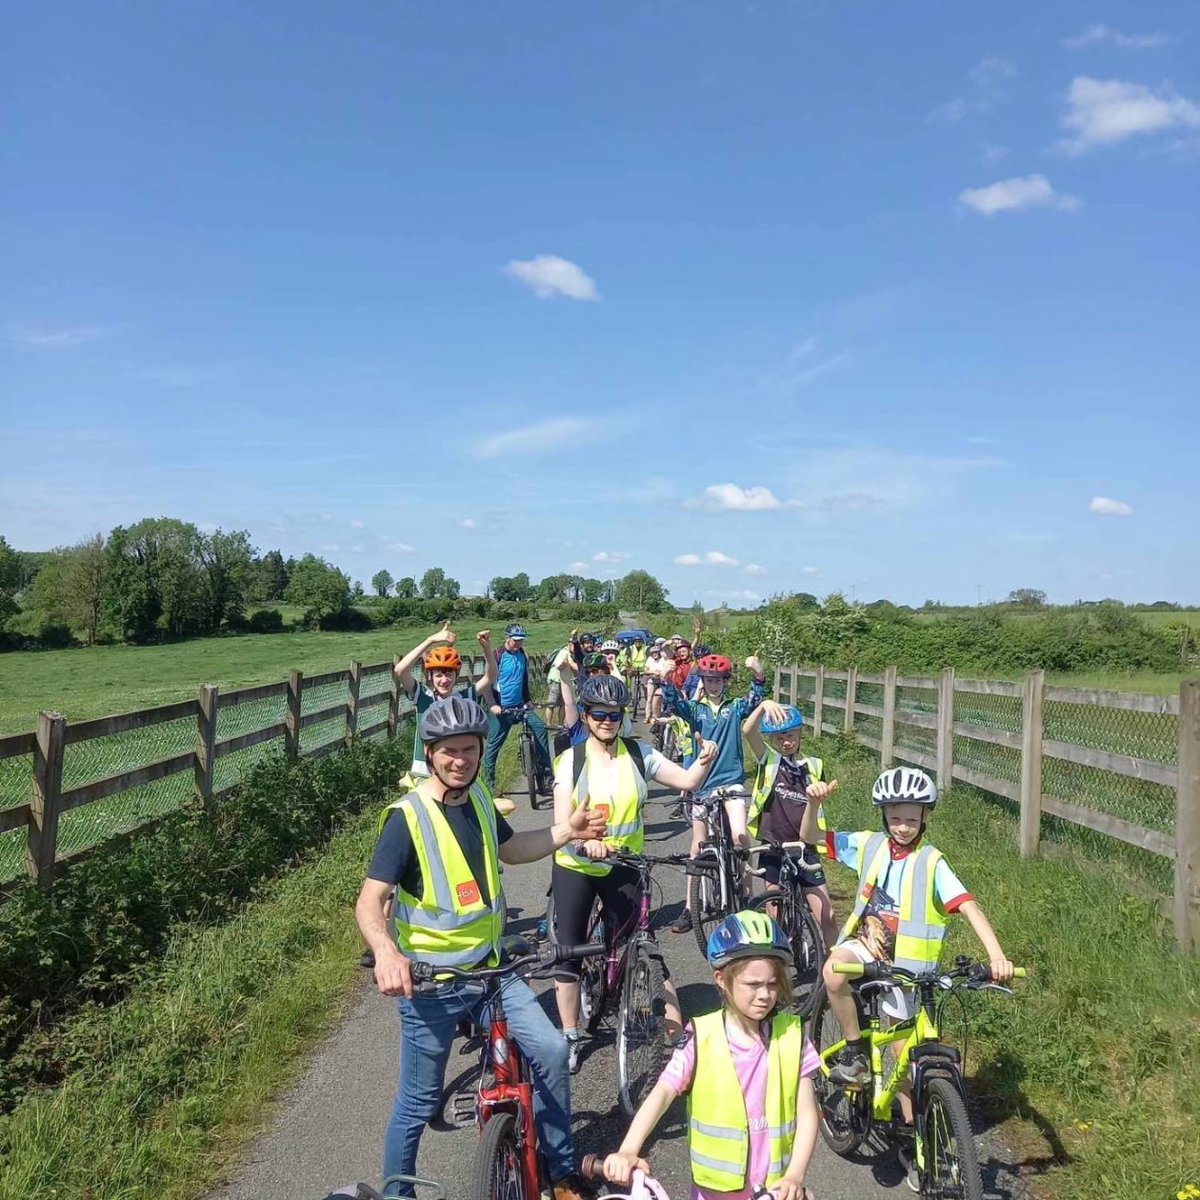 All 35 of us enjoying a break on the #GortMiniGreenway enjoying the views & landscapes as part of #Bikeweek2024 @galwayactive @GalwayCoCo @TFIupdates #Gortcycletrails #SafeCycleTrails #DiscoverSouthGalway